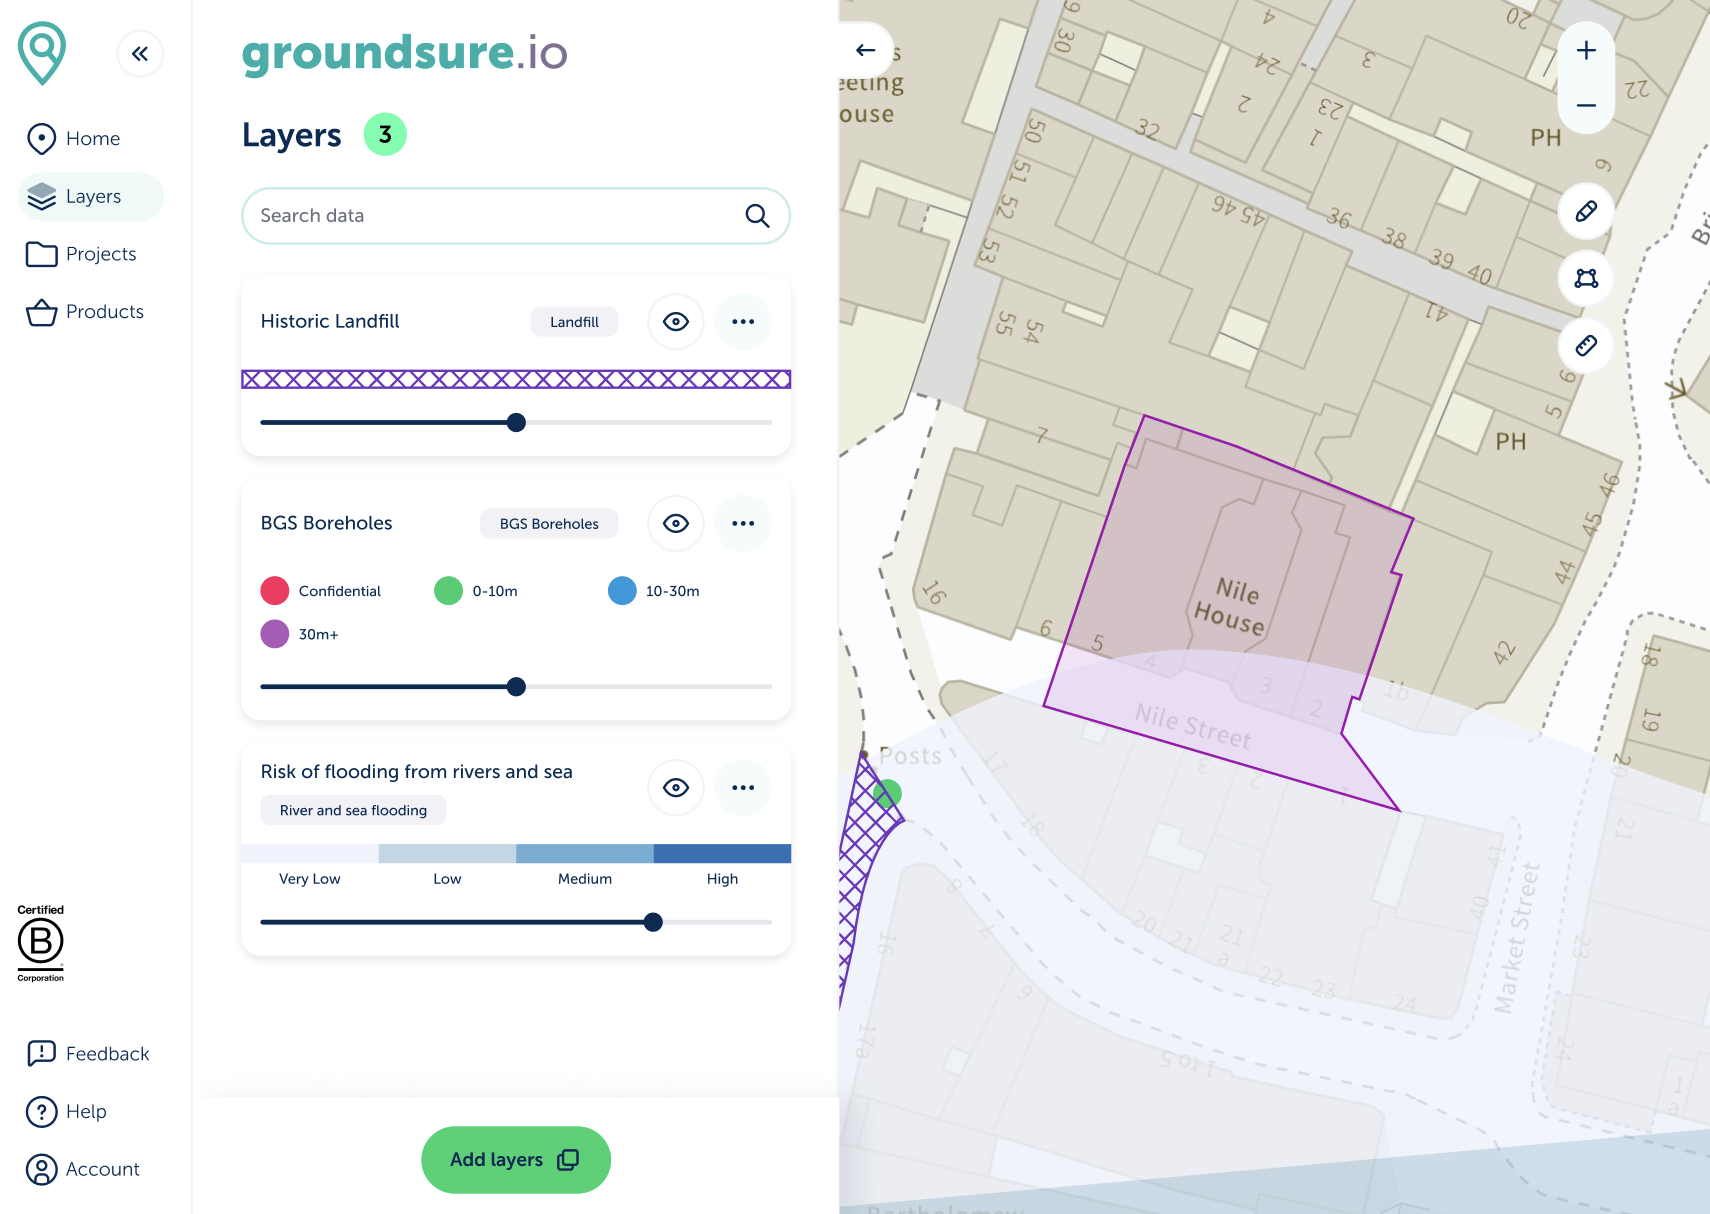 Discover how groundsure.io can enhance your daily data requirements